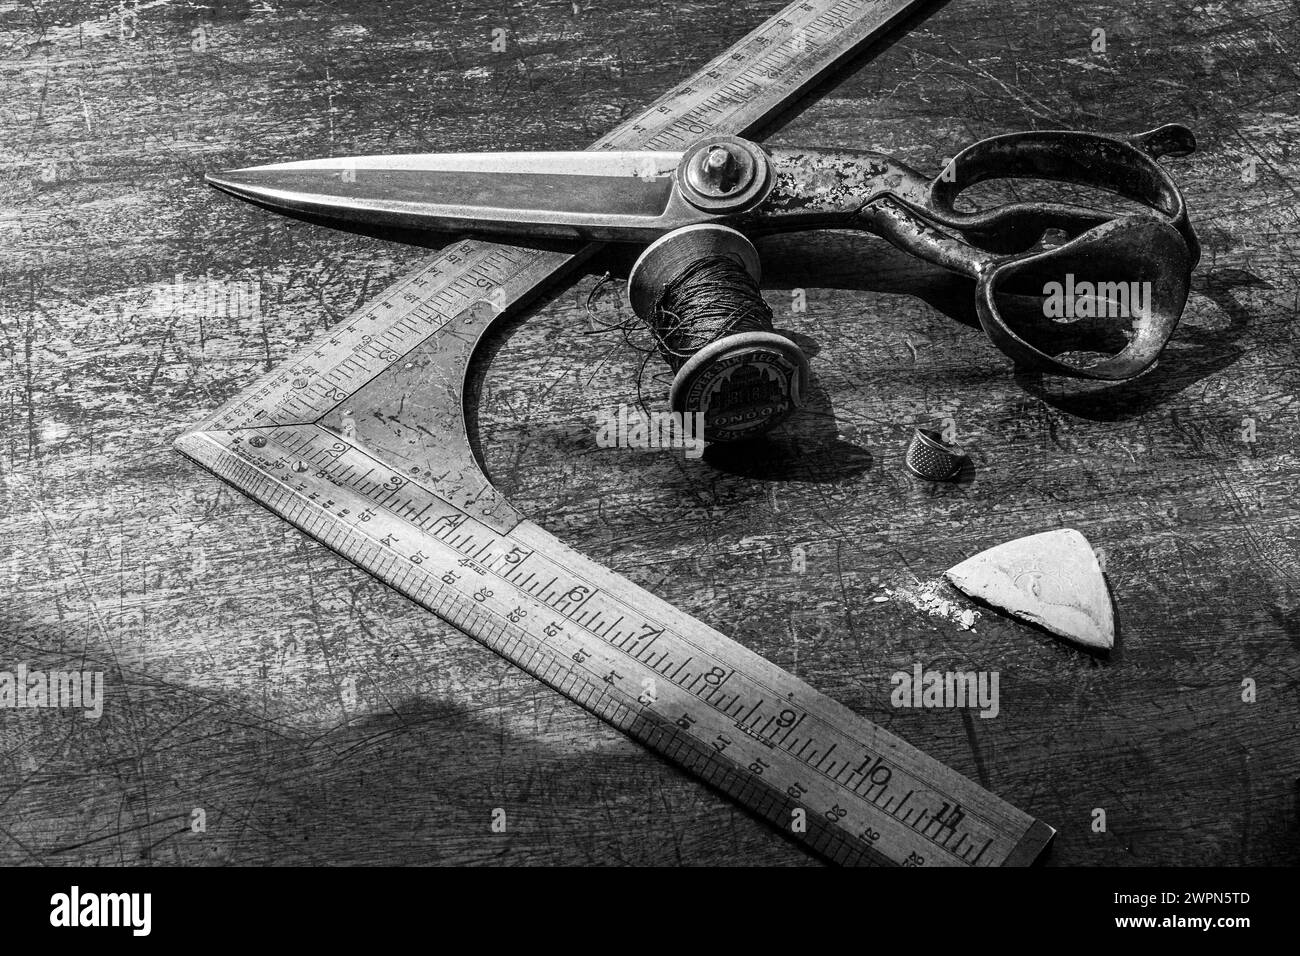 Old tailor measuring tool with scissors and chalk on tailors work bench Stock Photo